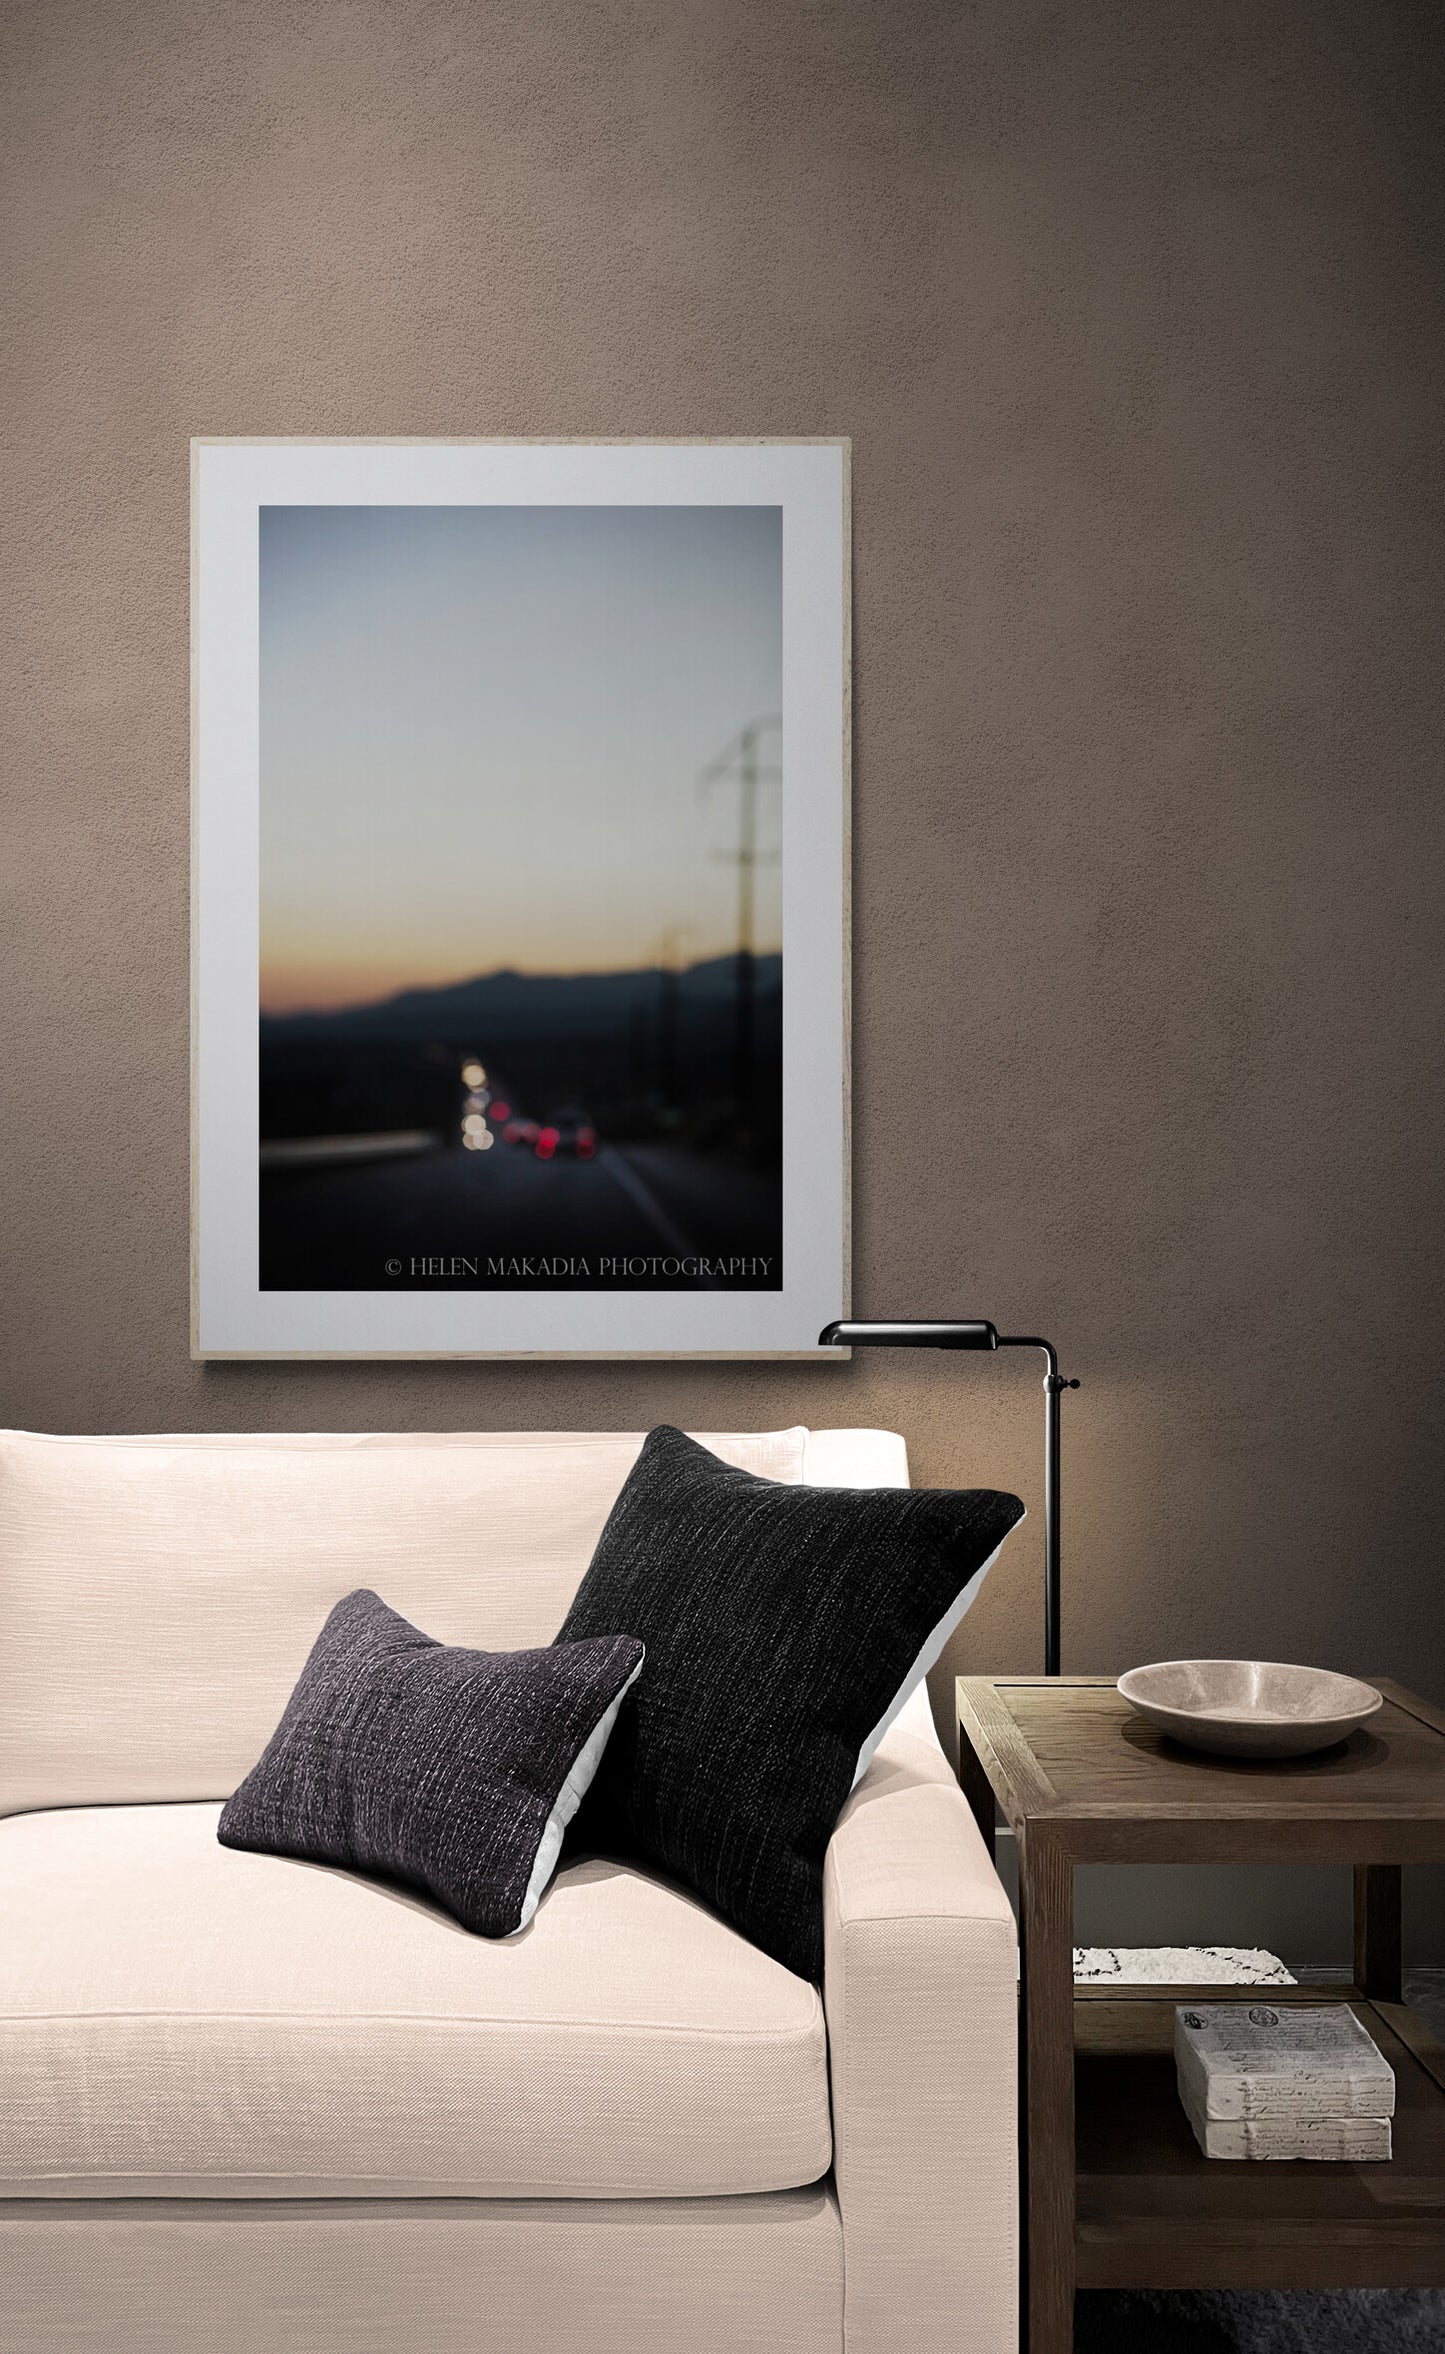 Blurred Tail lights Travel Photograph as Living Room Wall Art